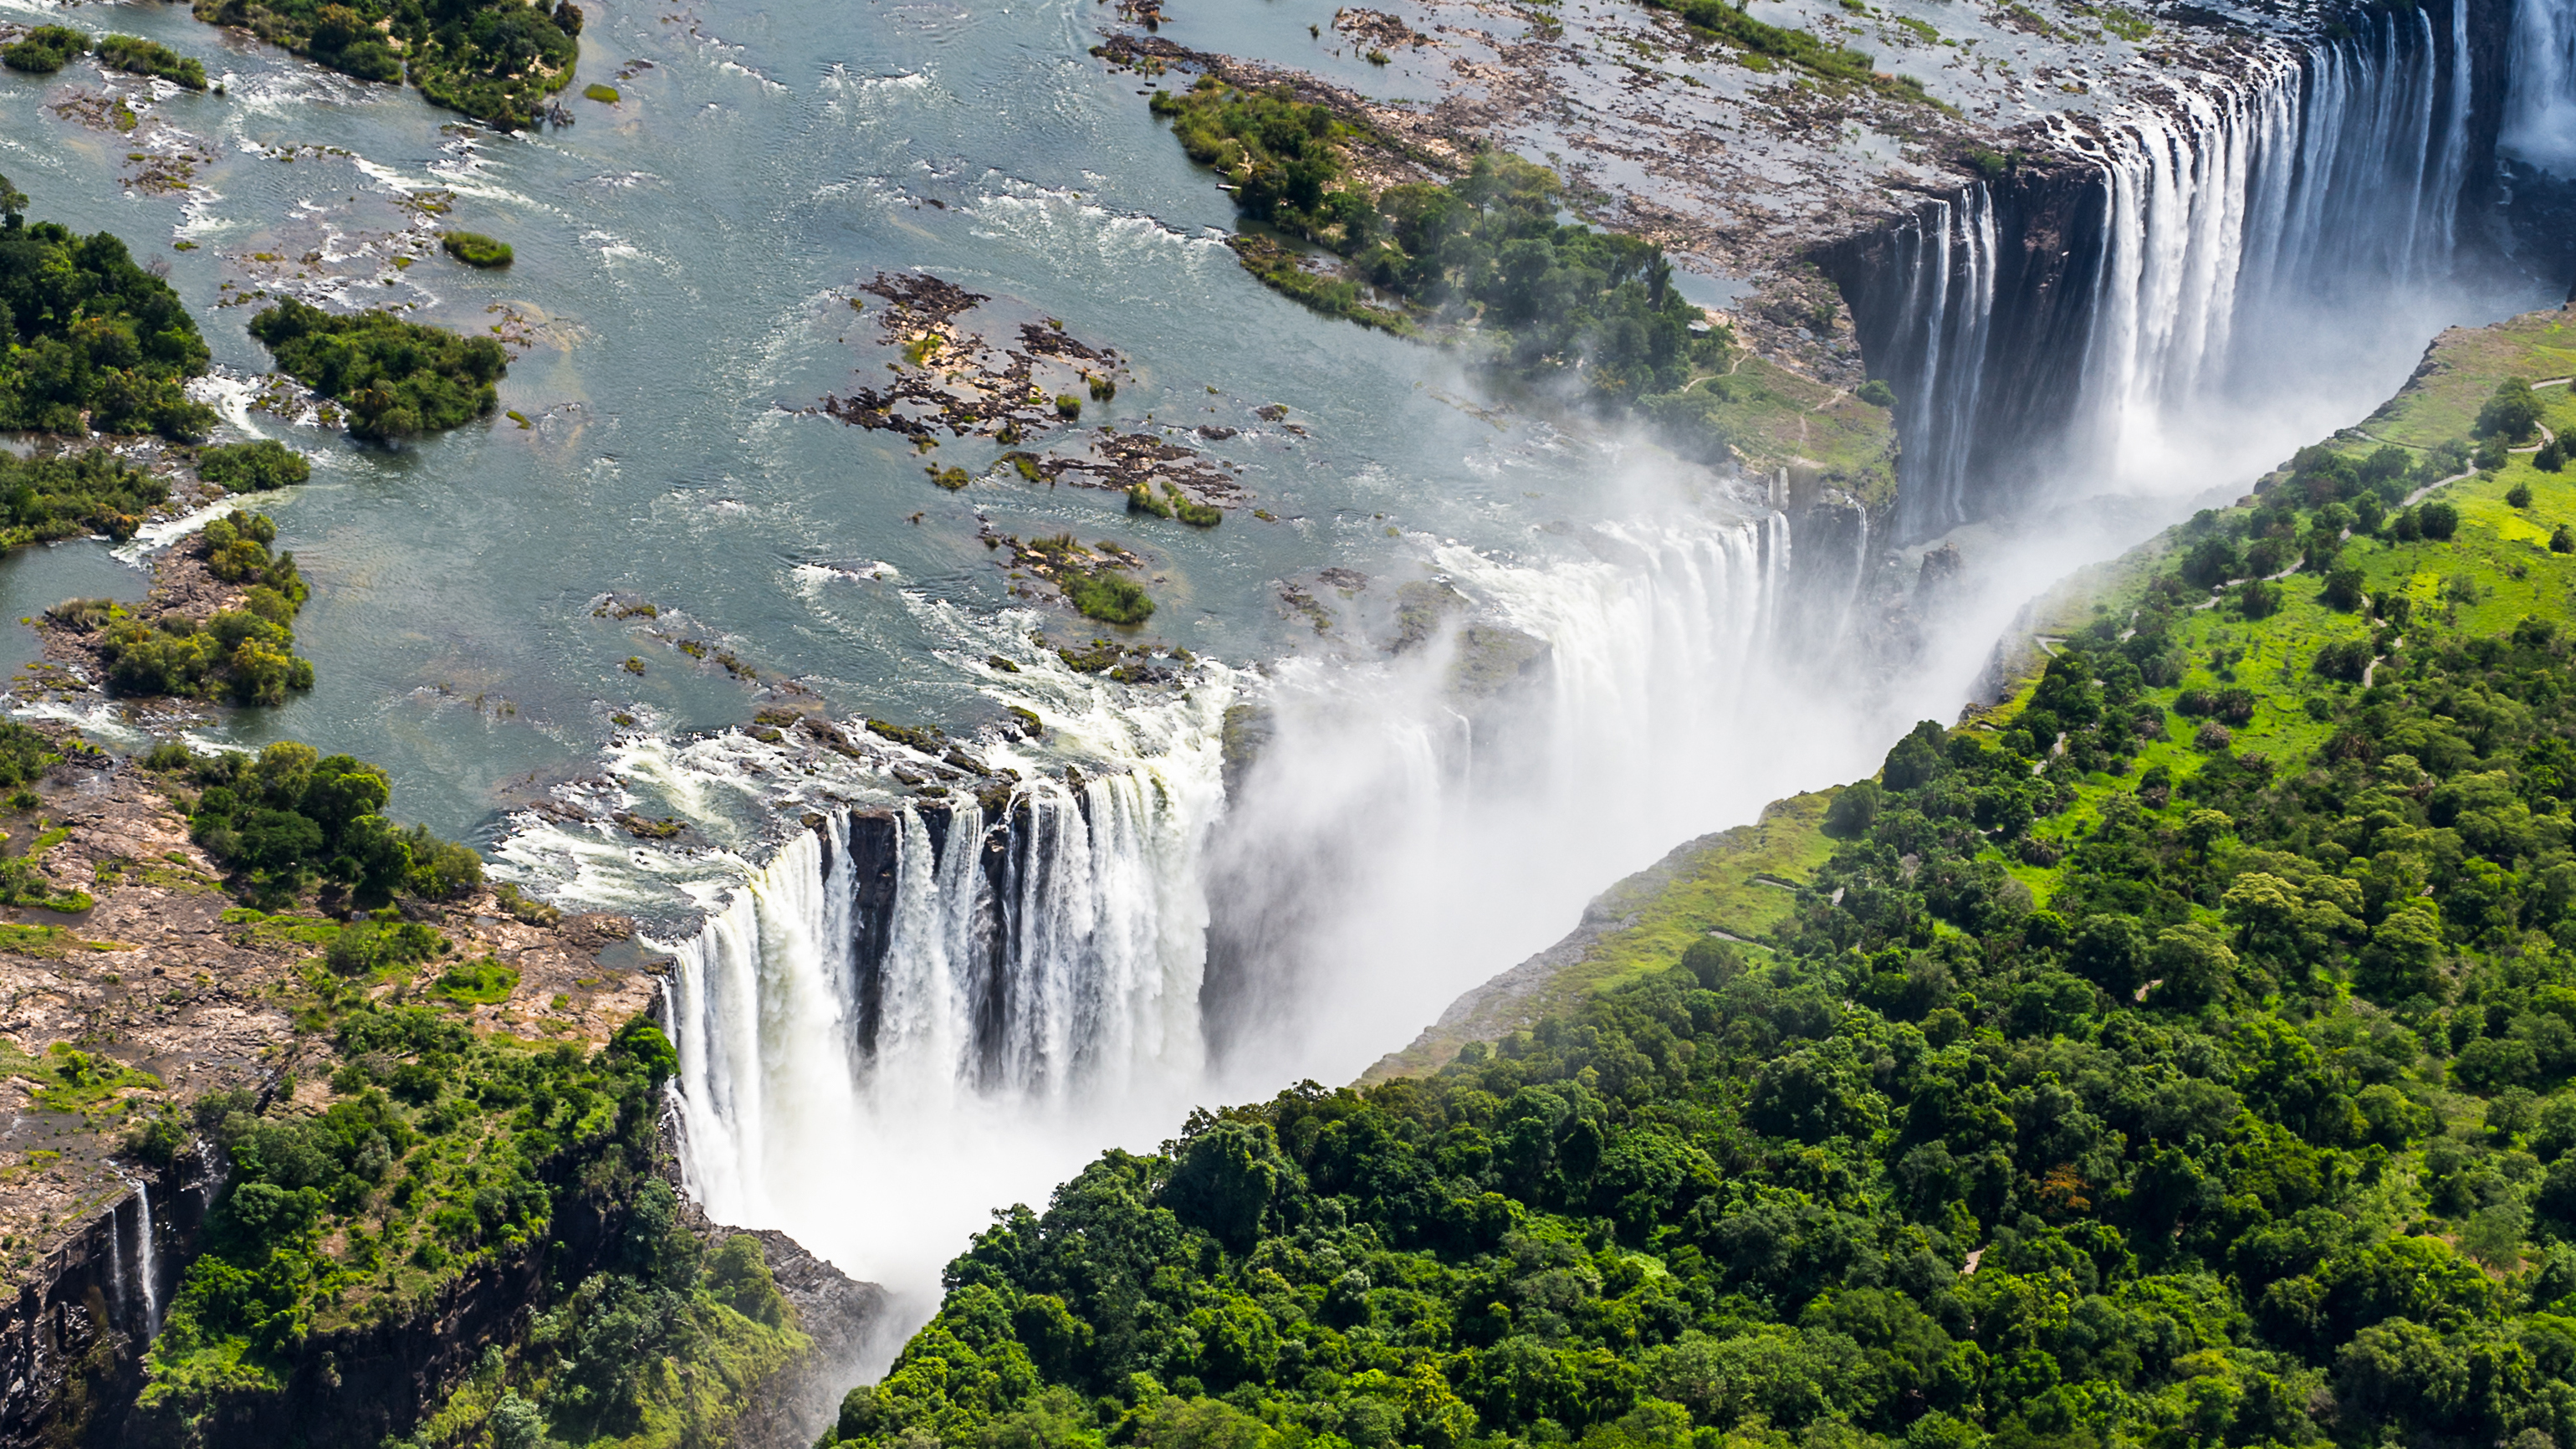 TRAVEL GUIDE: EVERYTHING YOU NEED TO KNOW ABOUT VICTORIA FALLS